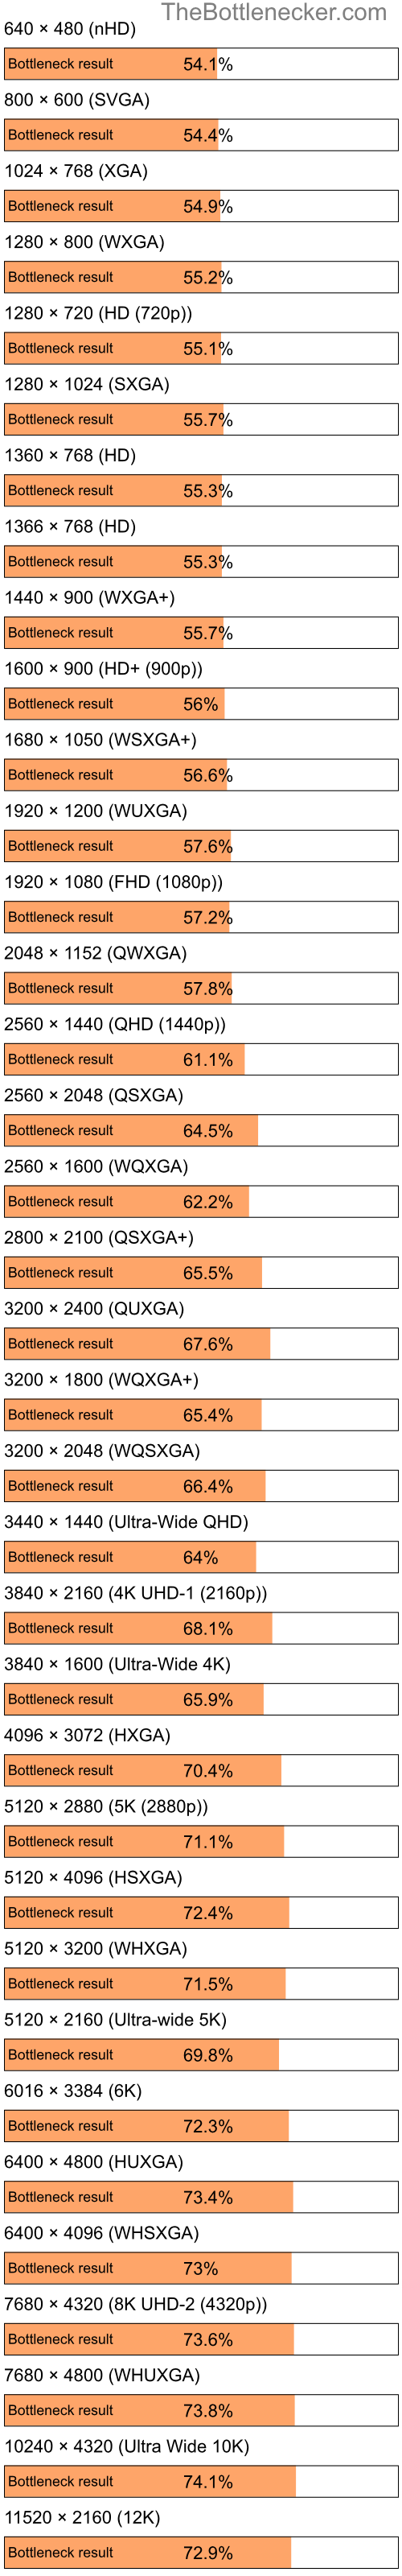 Bottleneck results by resolution for Intel Pentium 4 and NVIDIA GeForce 9300 GS in Processor Intense Tasks